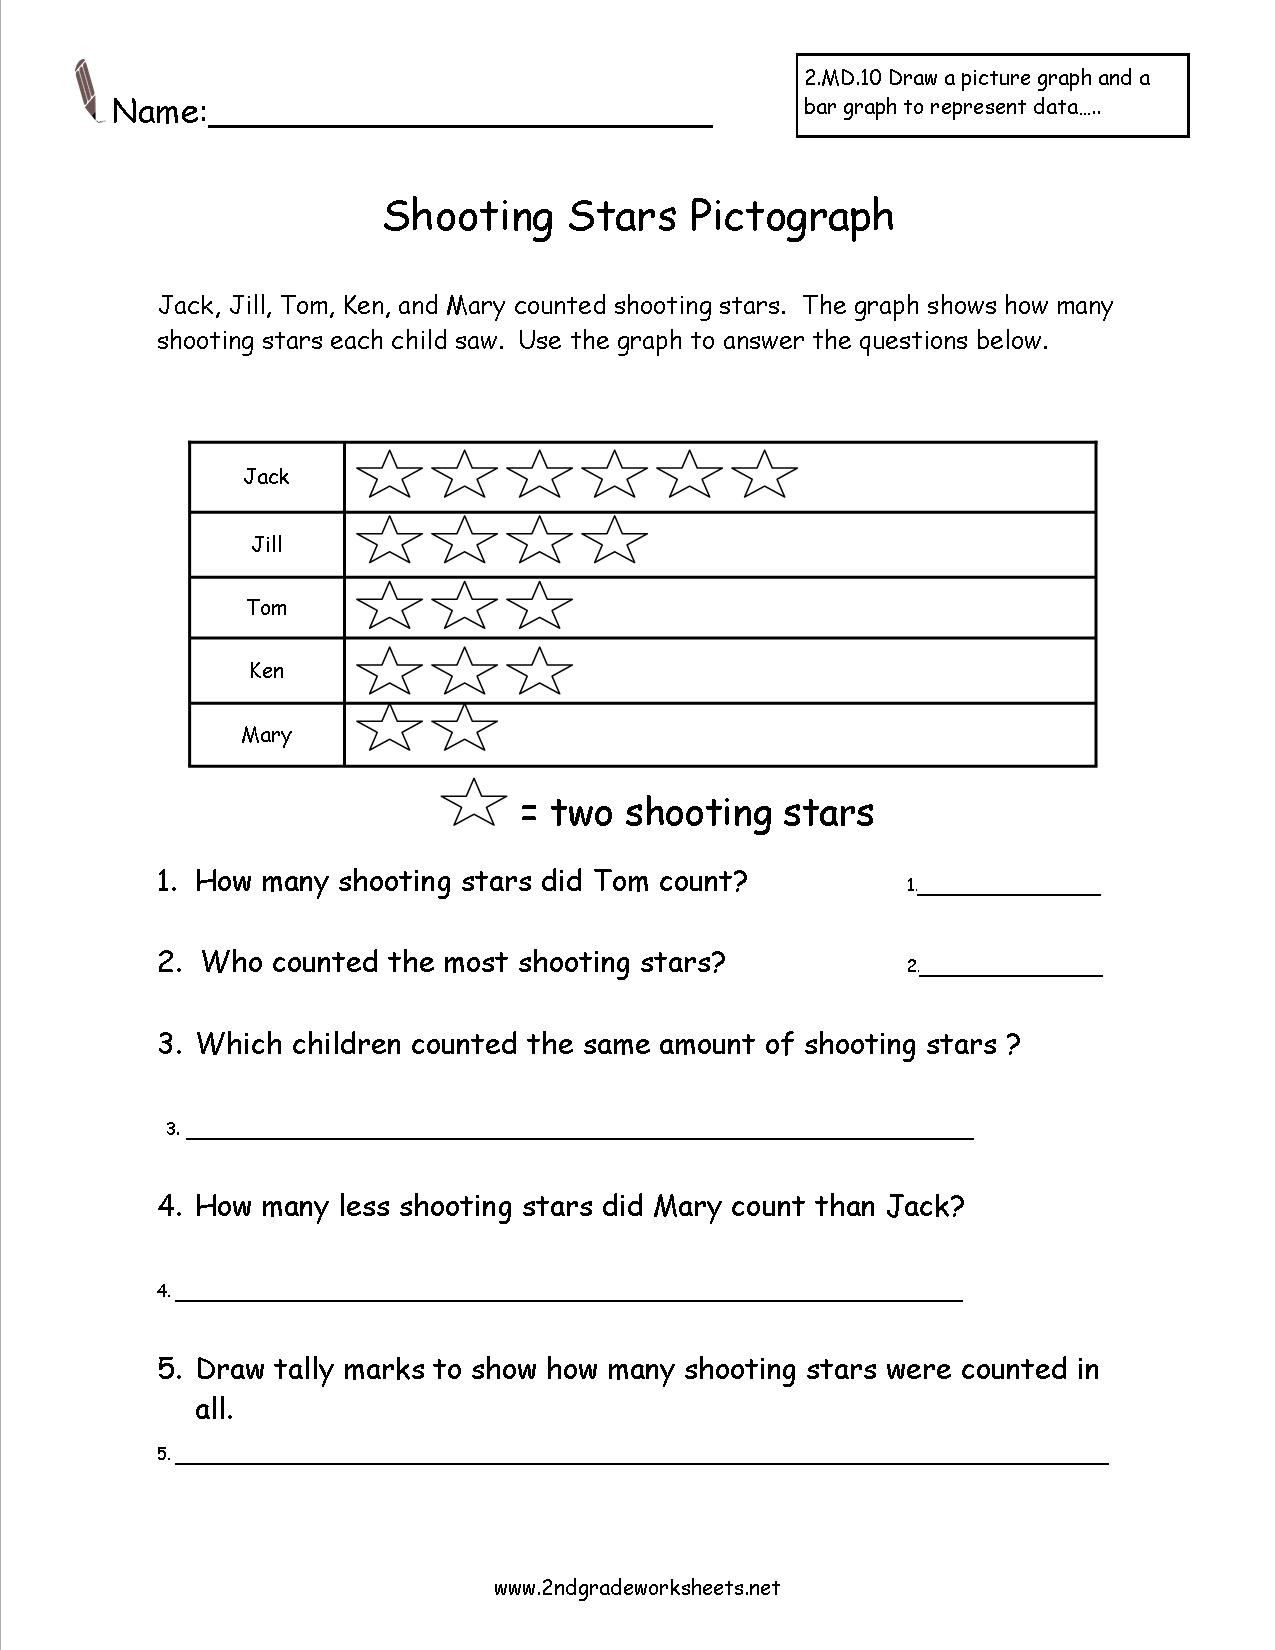 Pictograph Worksheets 3rd Grade Shooting Stars Pictograph Worksheet